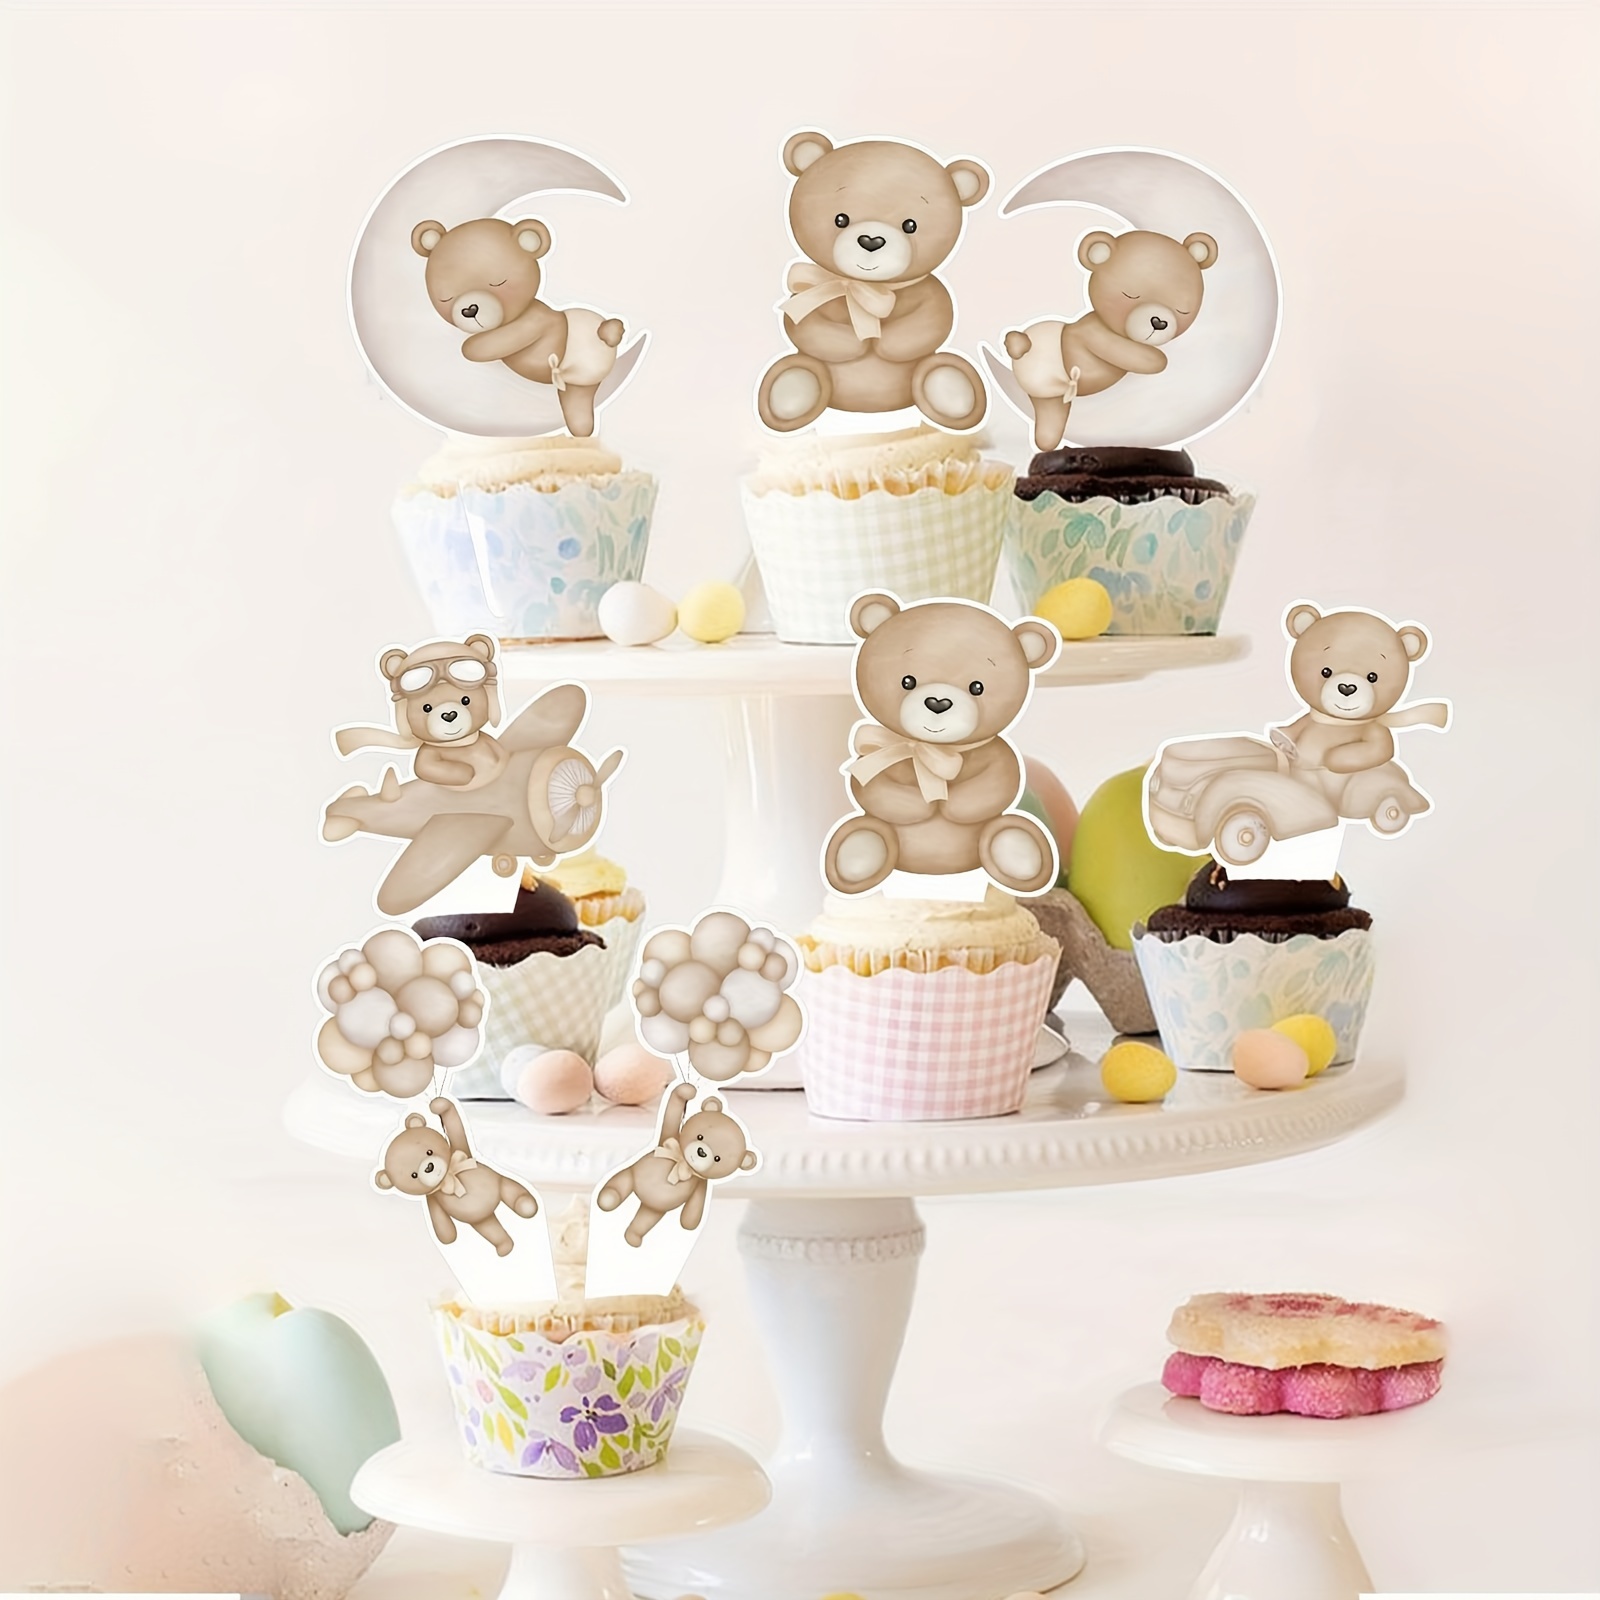 

48pcs Bear Cupcake Toppers For We Can Bear Shower Decorations Bear Themed Shower Decorations Bear Cake Cupcake Toppers Birthday Party Supplies